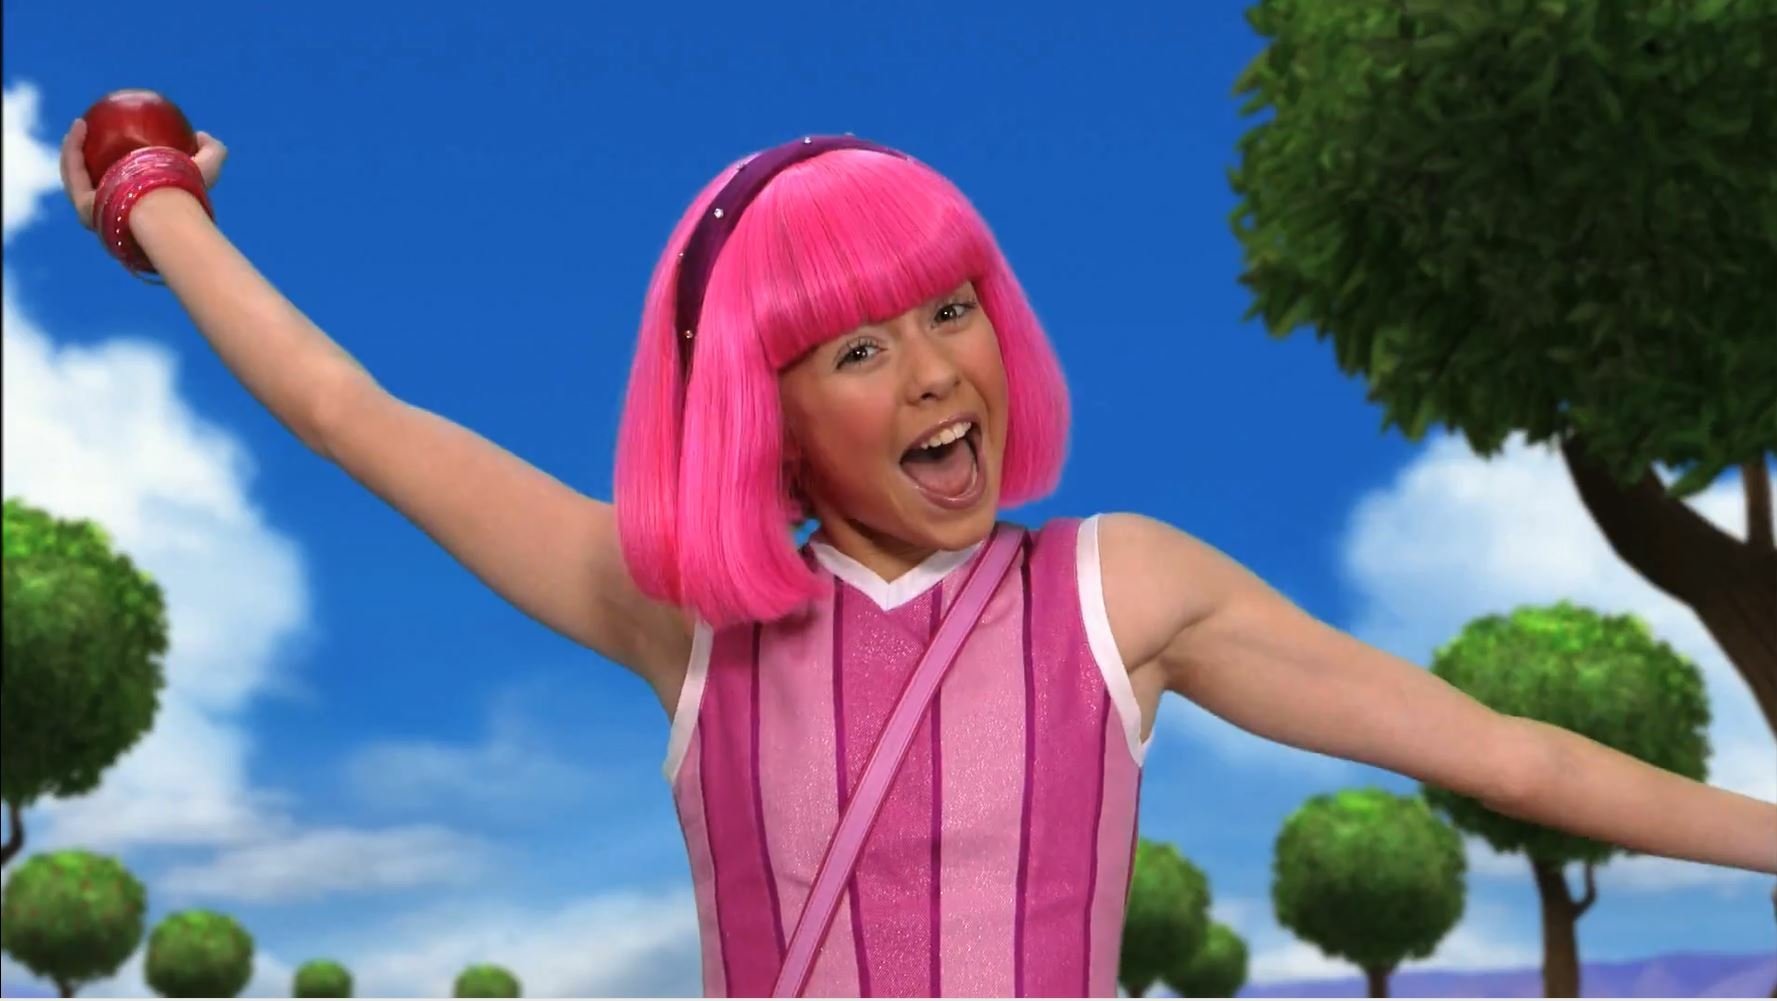 1777x1001 LazyTown Wallpaper Background Image. 